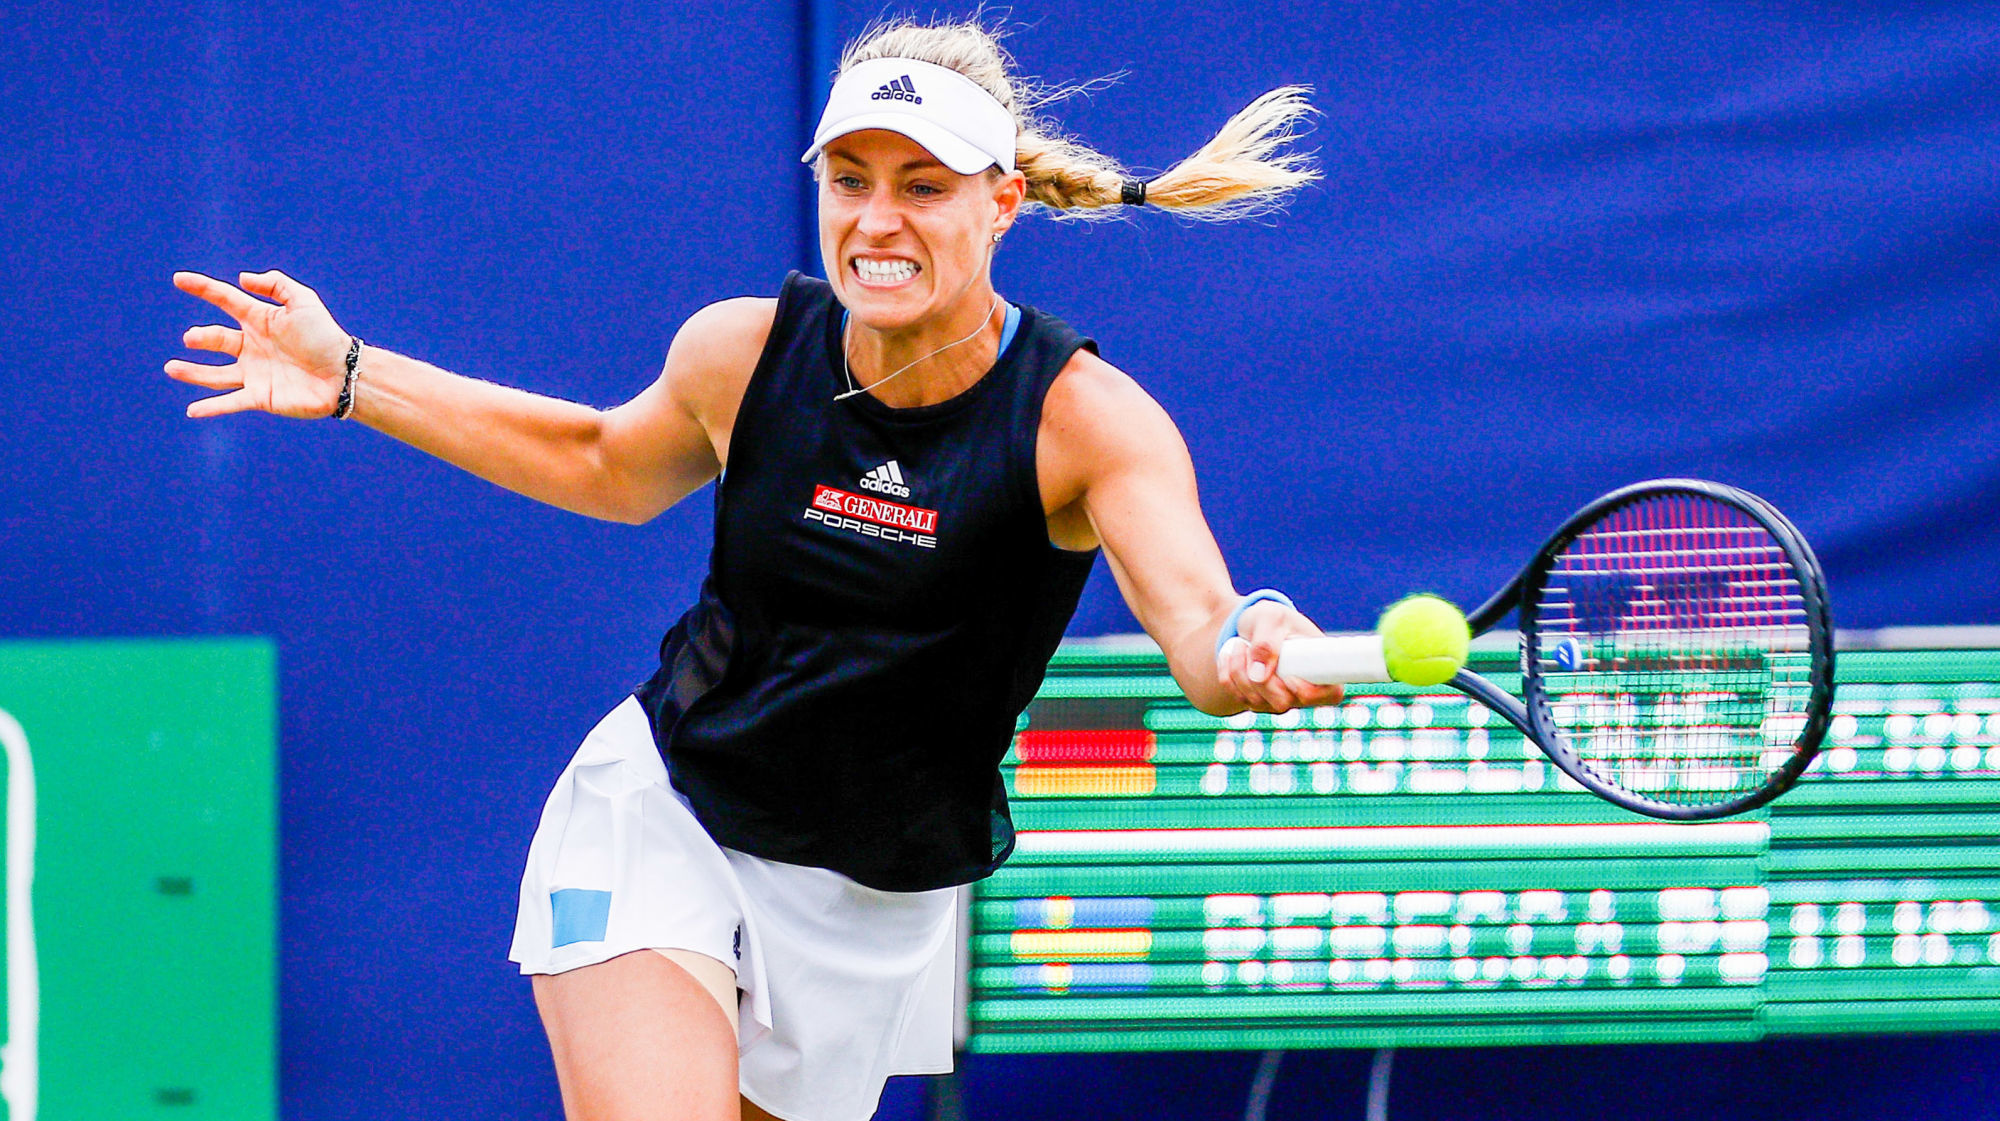 26th June 2019, Devonshire Park, Eastbourne, England; Nature Valley International Tennis Tournament; Angelique Kerber (GER) plays a forehand shot in her match 
Photo : Actionplus / Icon Sport